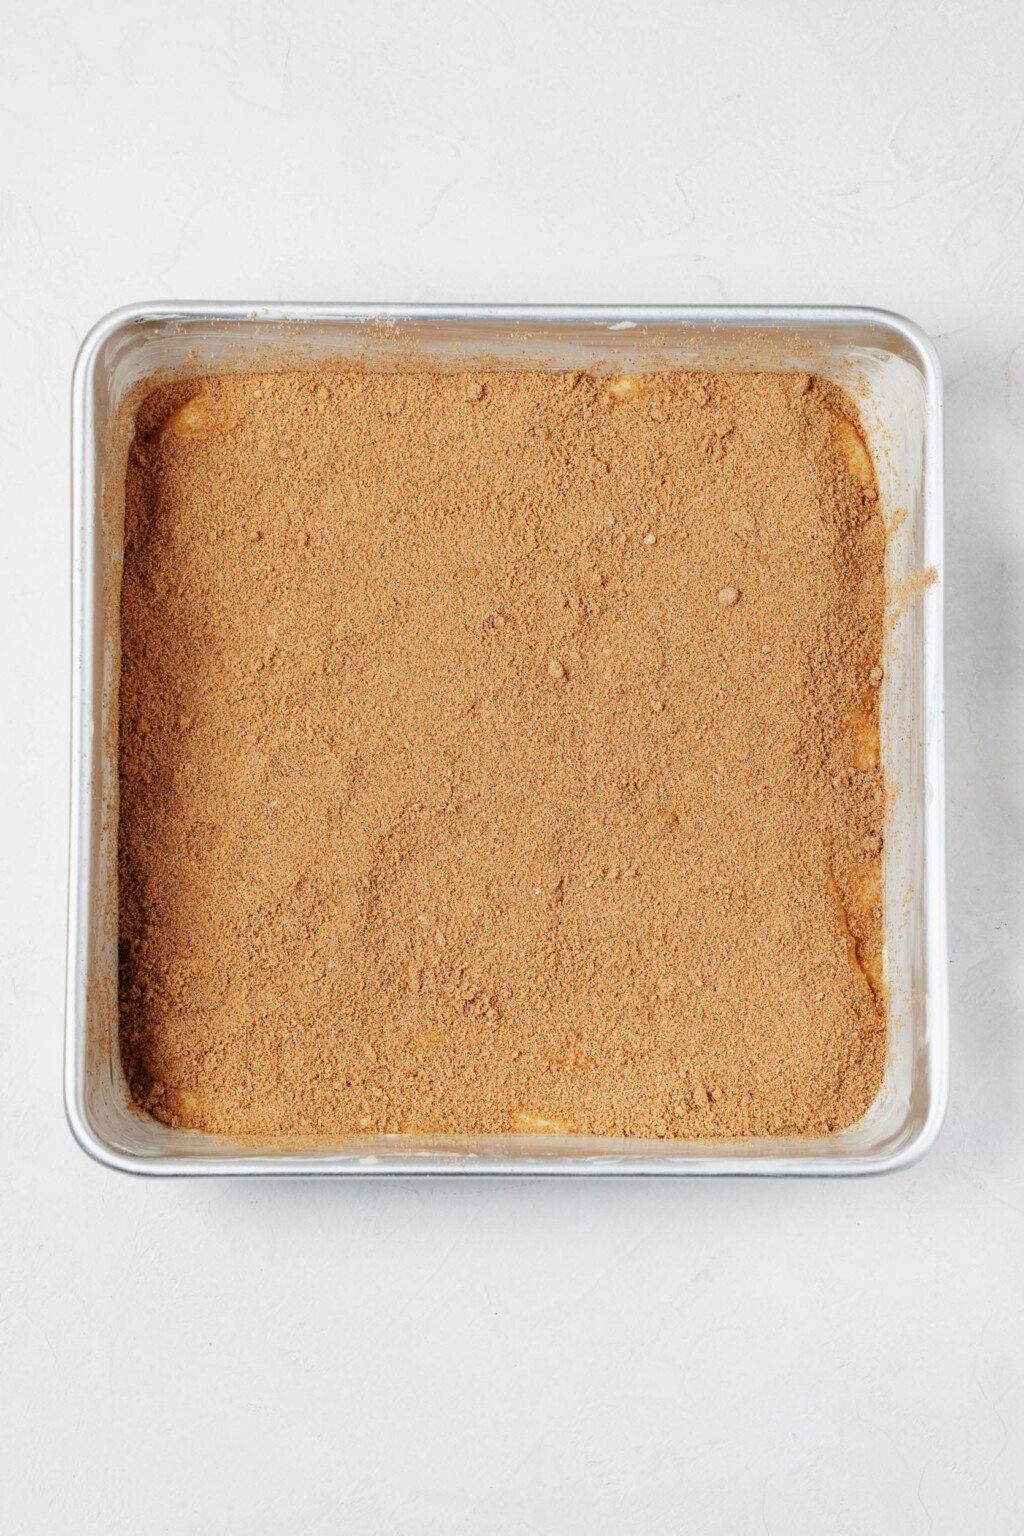 A square cake pan is pictured. It holds cake batter topped with cinnamon sugar.